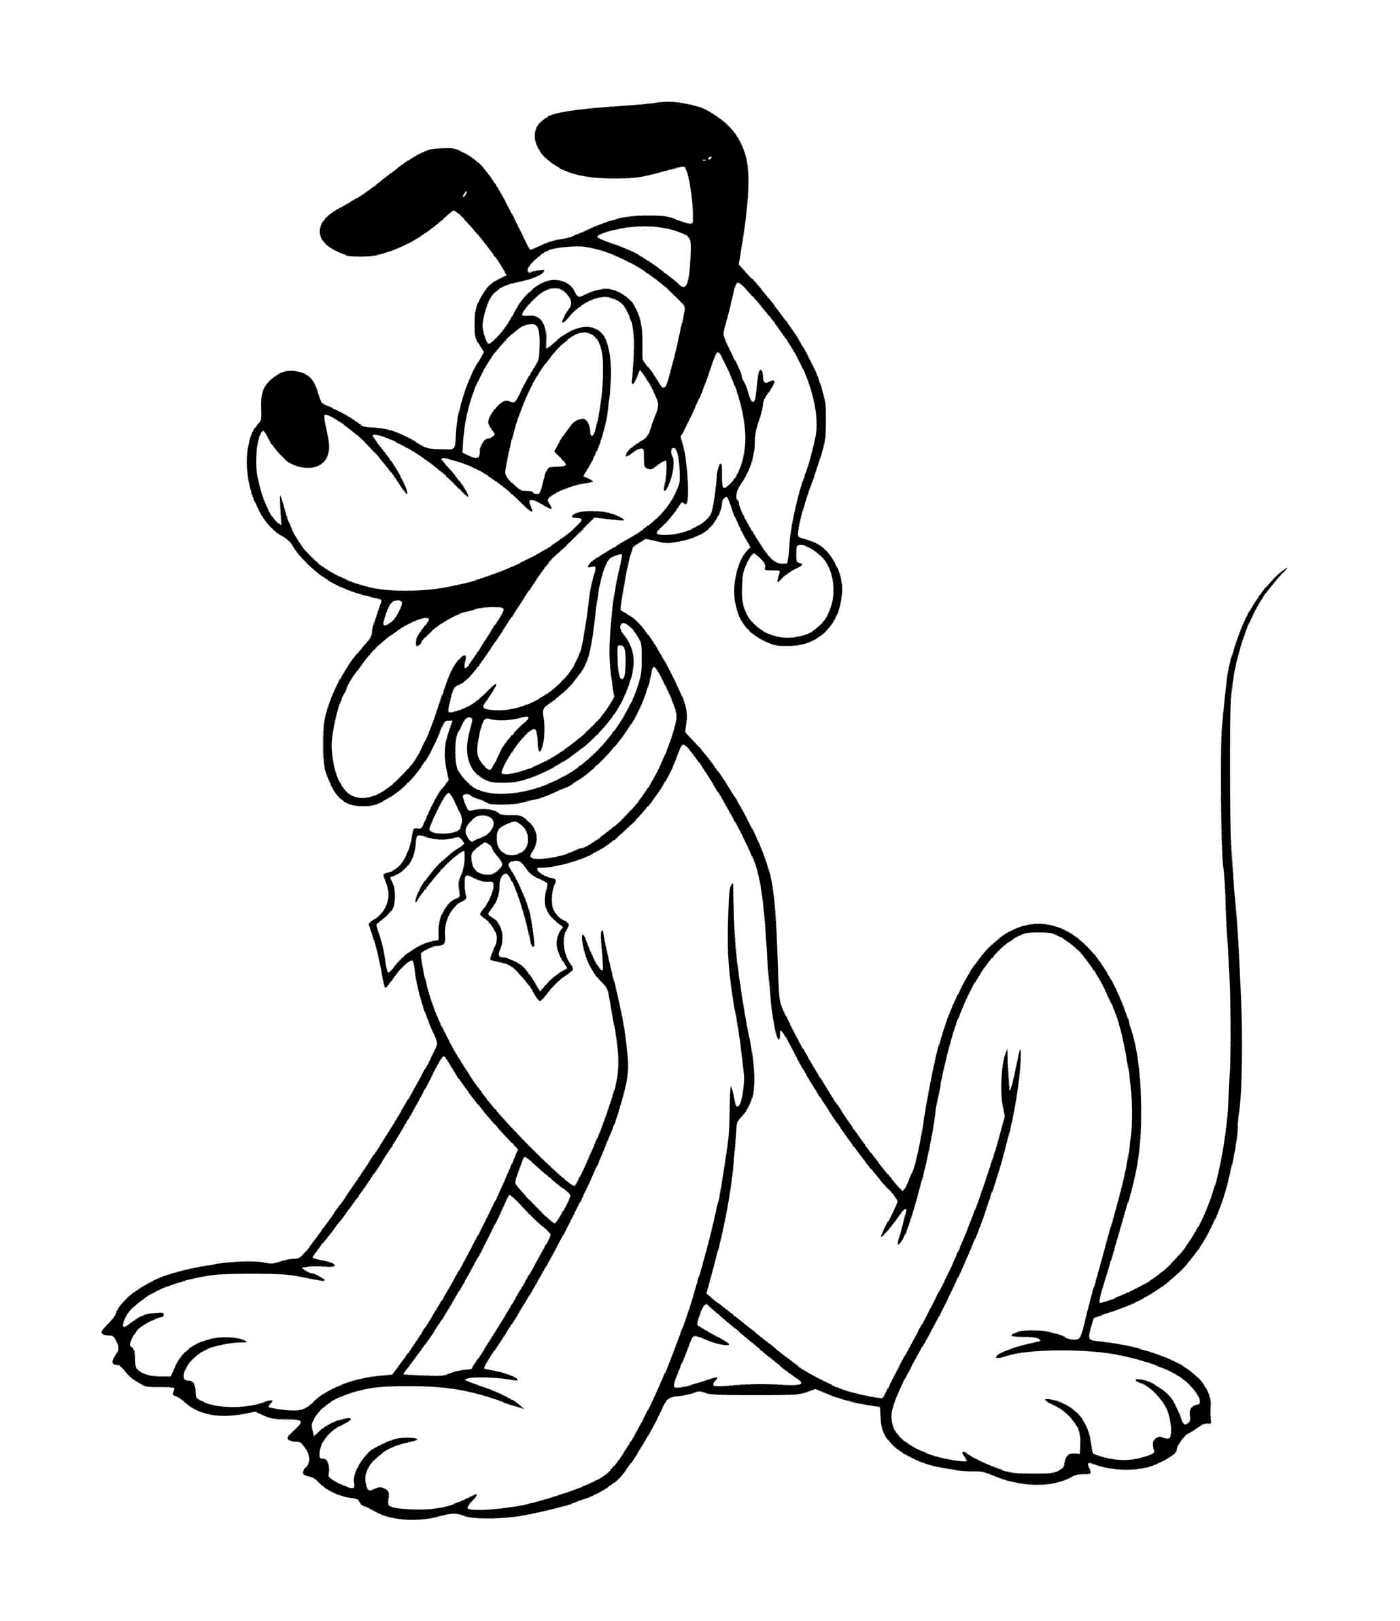  Pluto with bonnet and festive necklace 